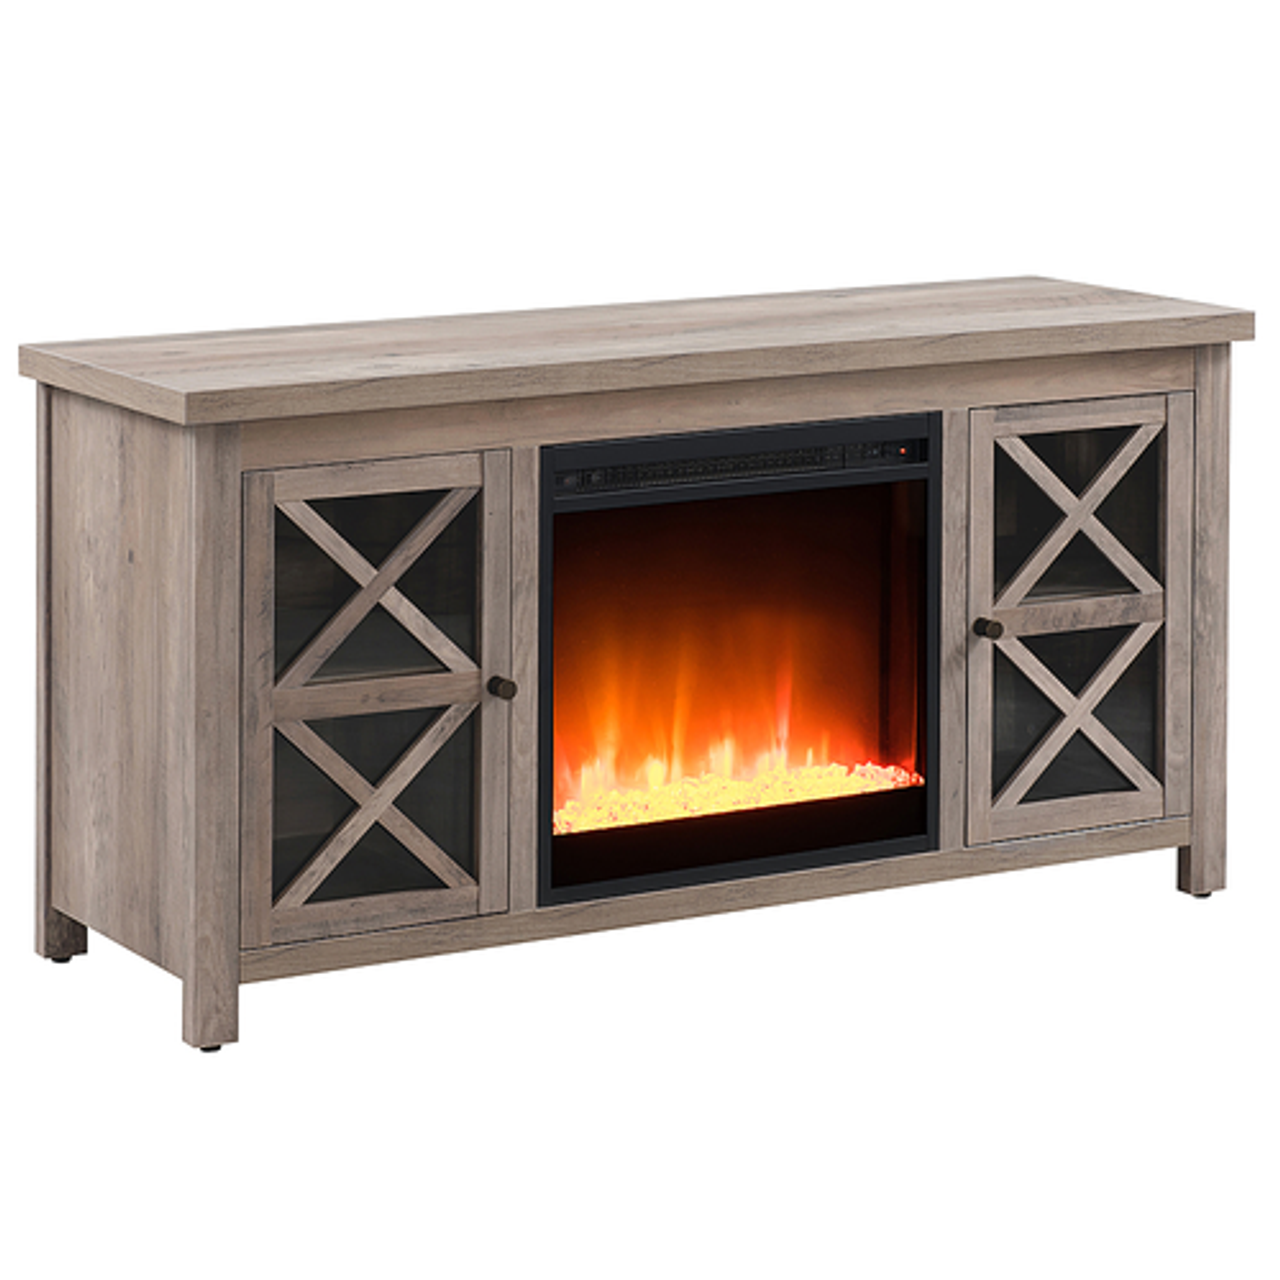 Camden&Wells - Colton 47.75" TV Stand with Crystal Fireplace - Gray Oak